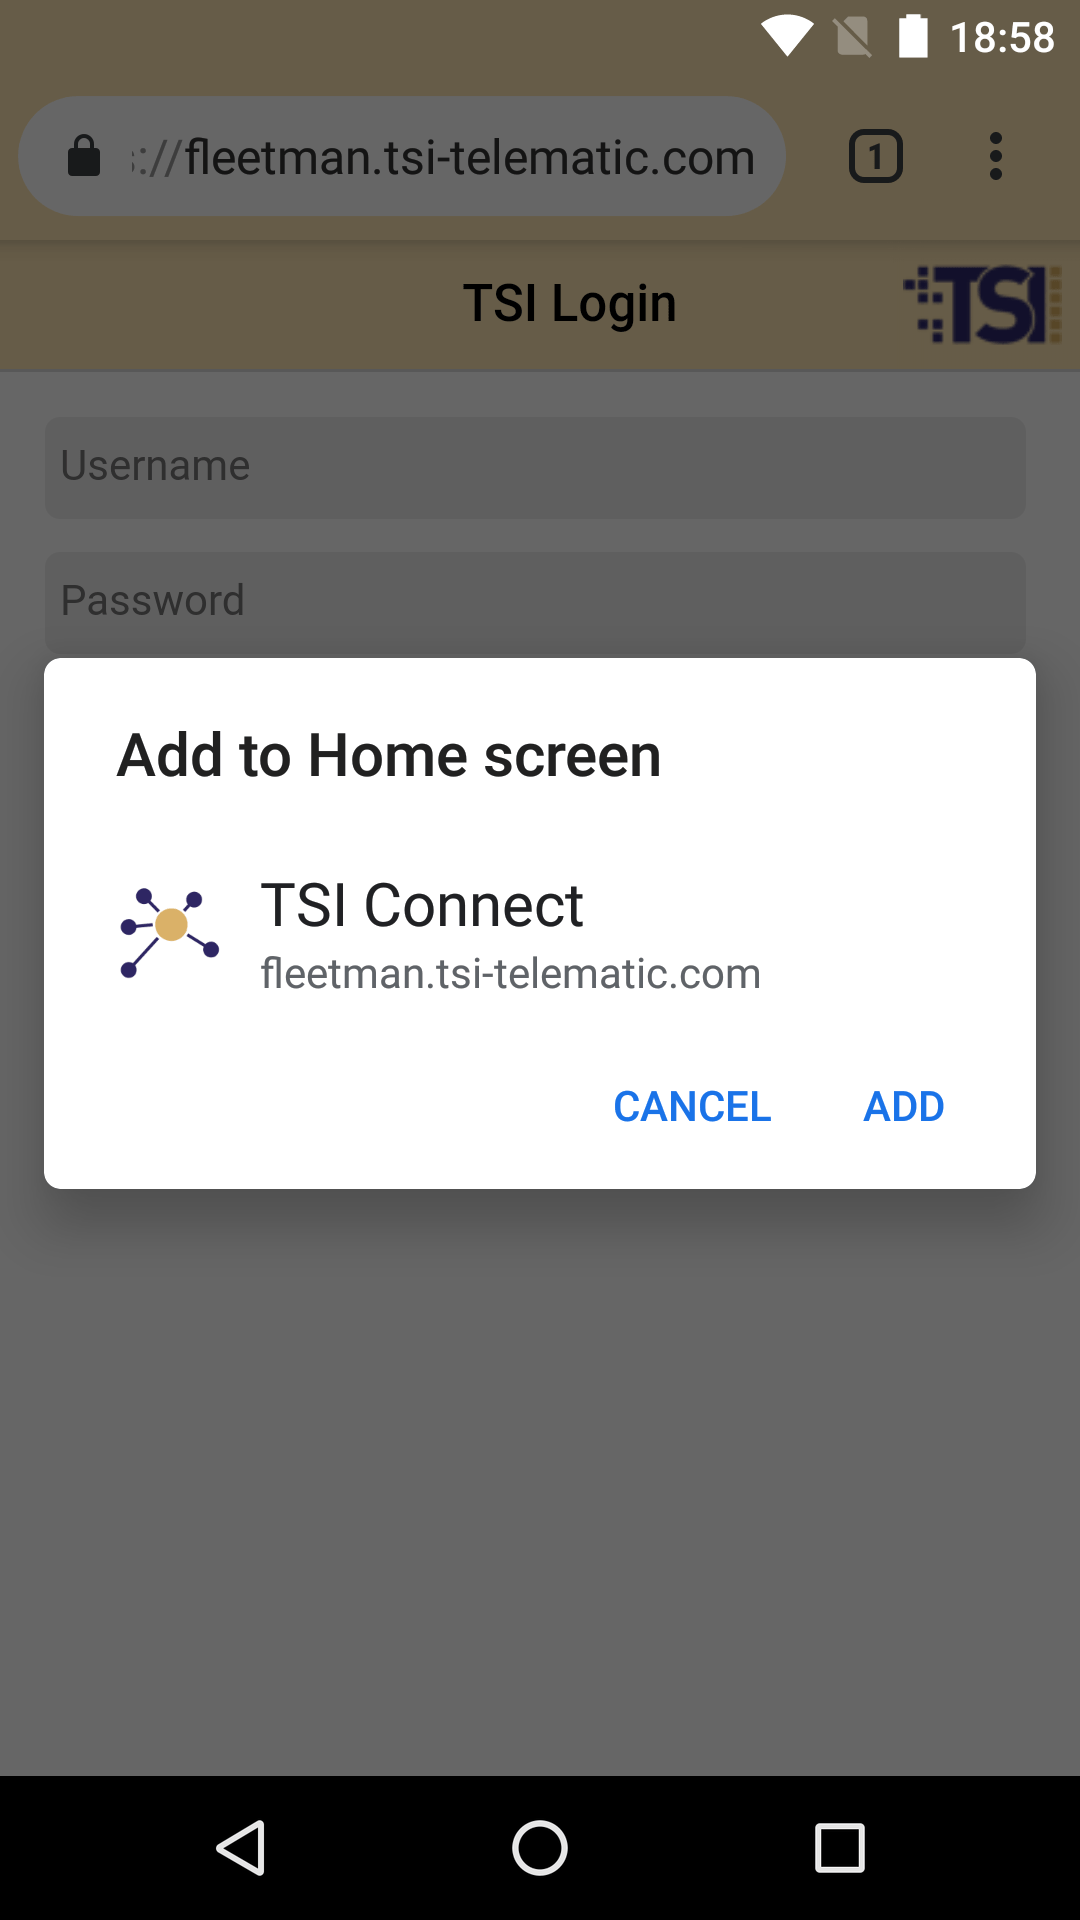 Confirm with „Add“